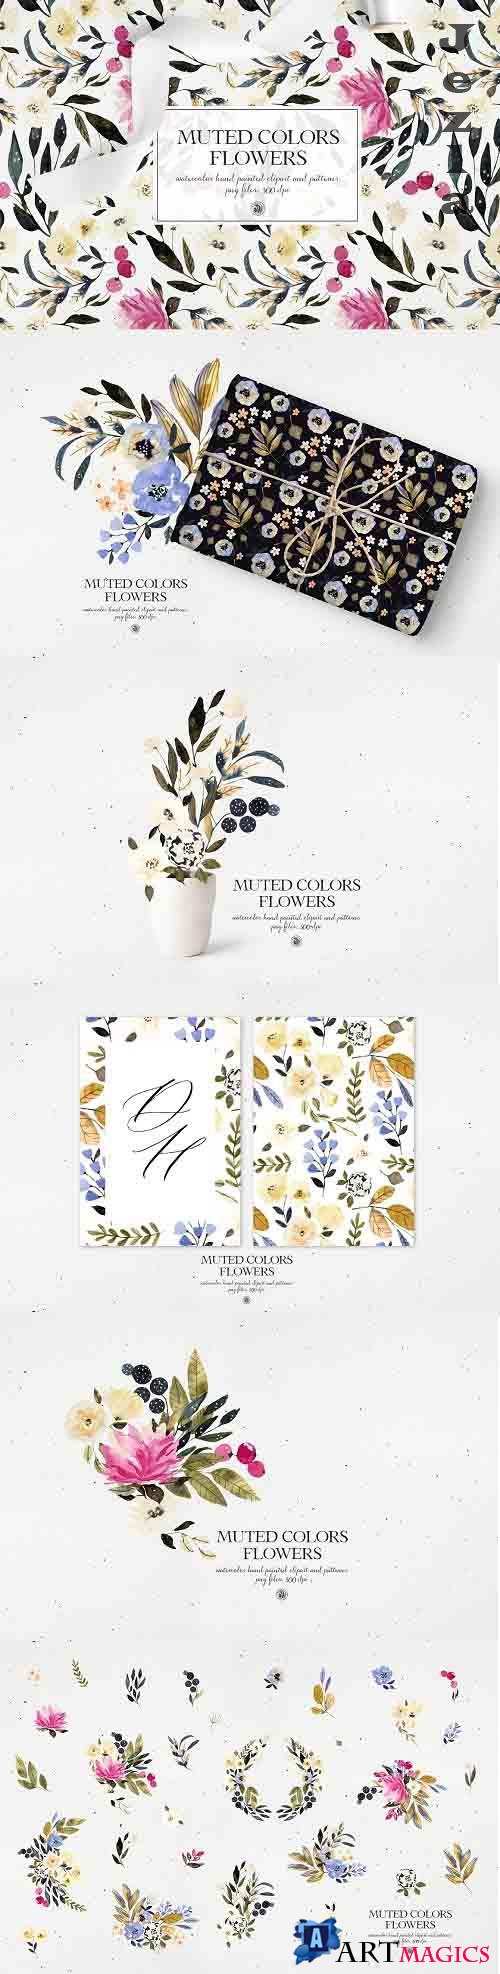 Muted Colors Flowers watercolor set - 6132186